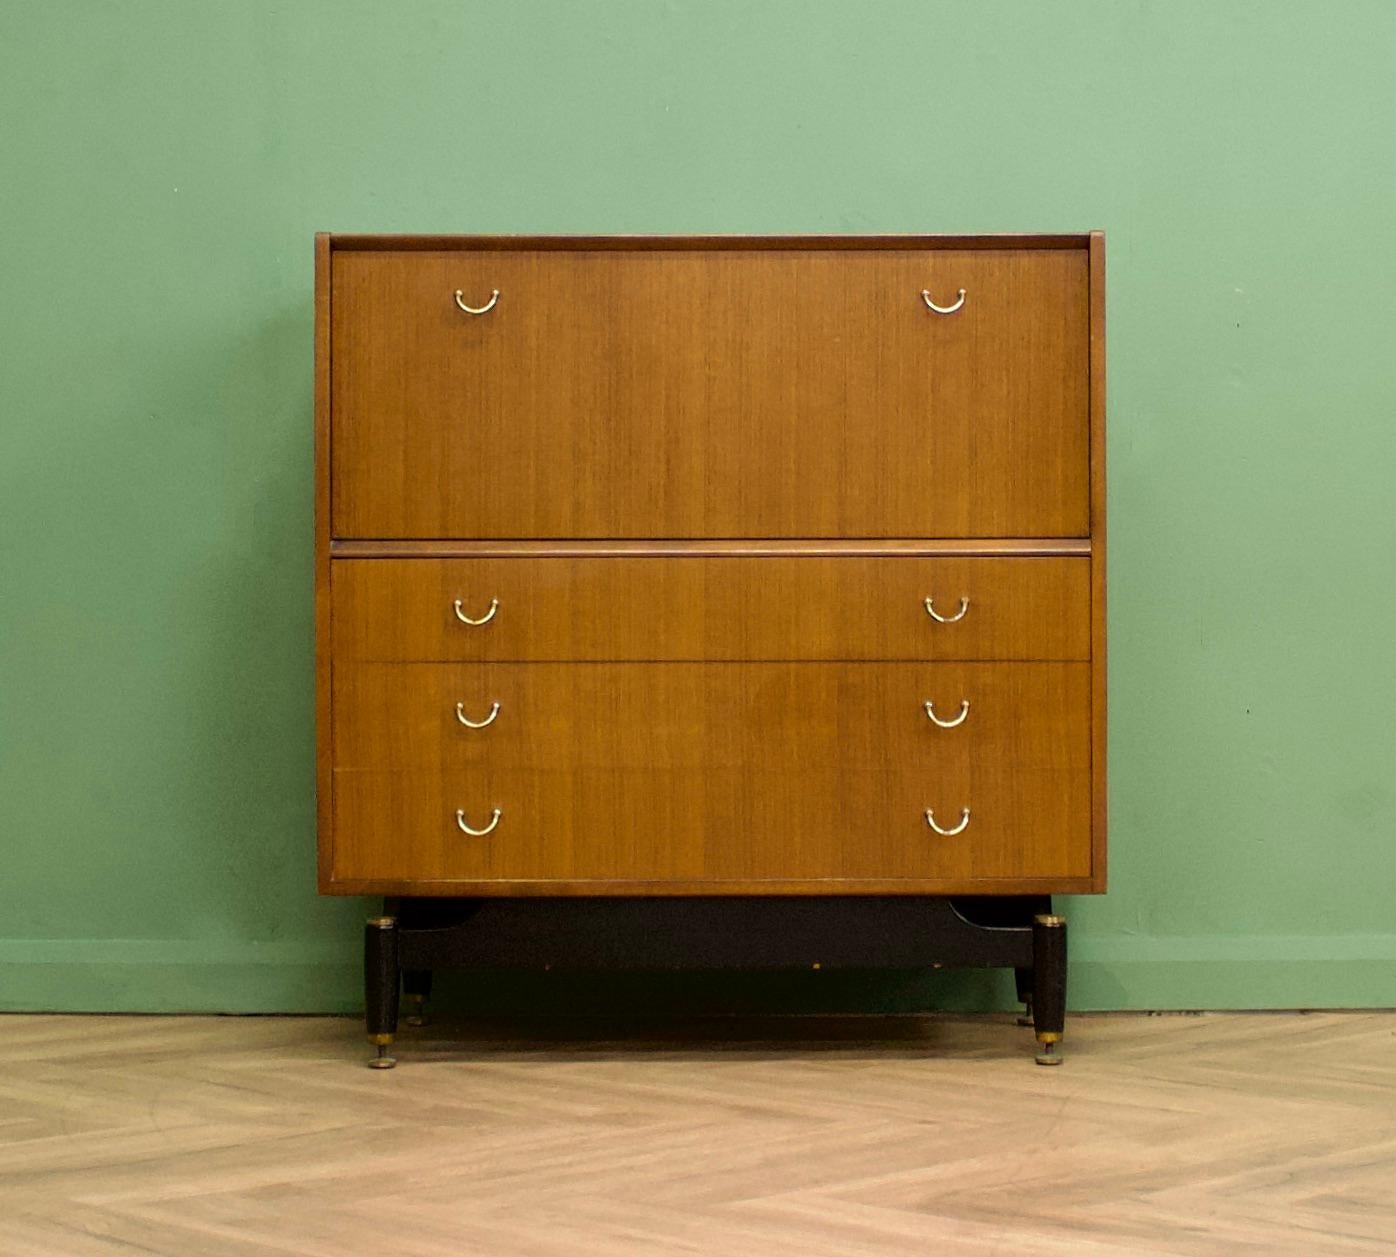 A mid century Tola and Black tallboy chest from G Plan (E Gomme)
Featuring a pull down compartment with an internal shelf and three drawers